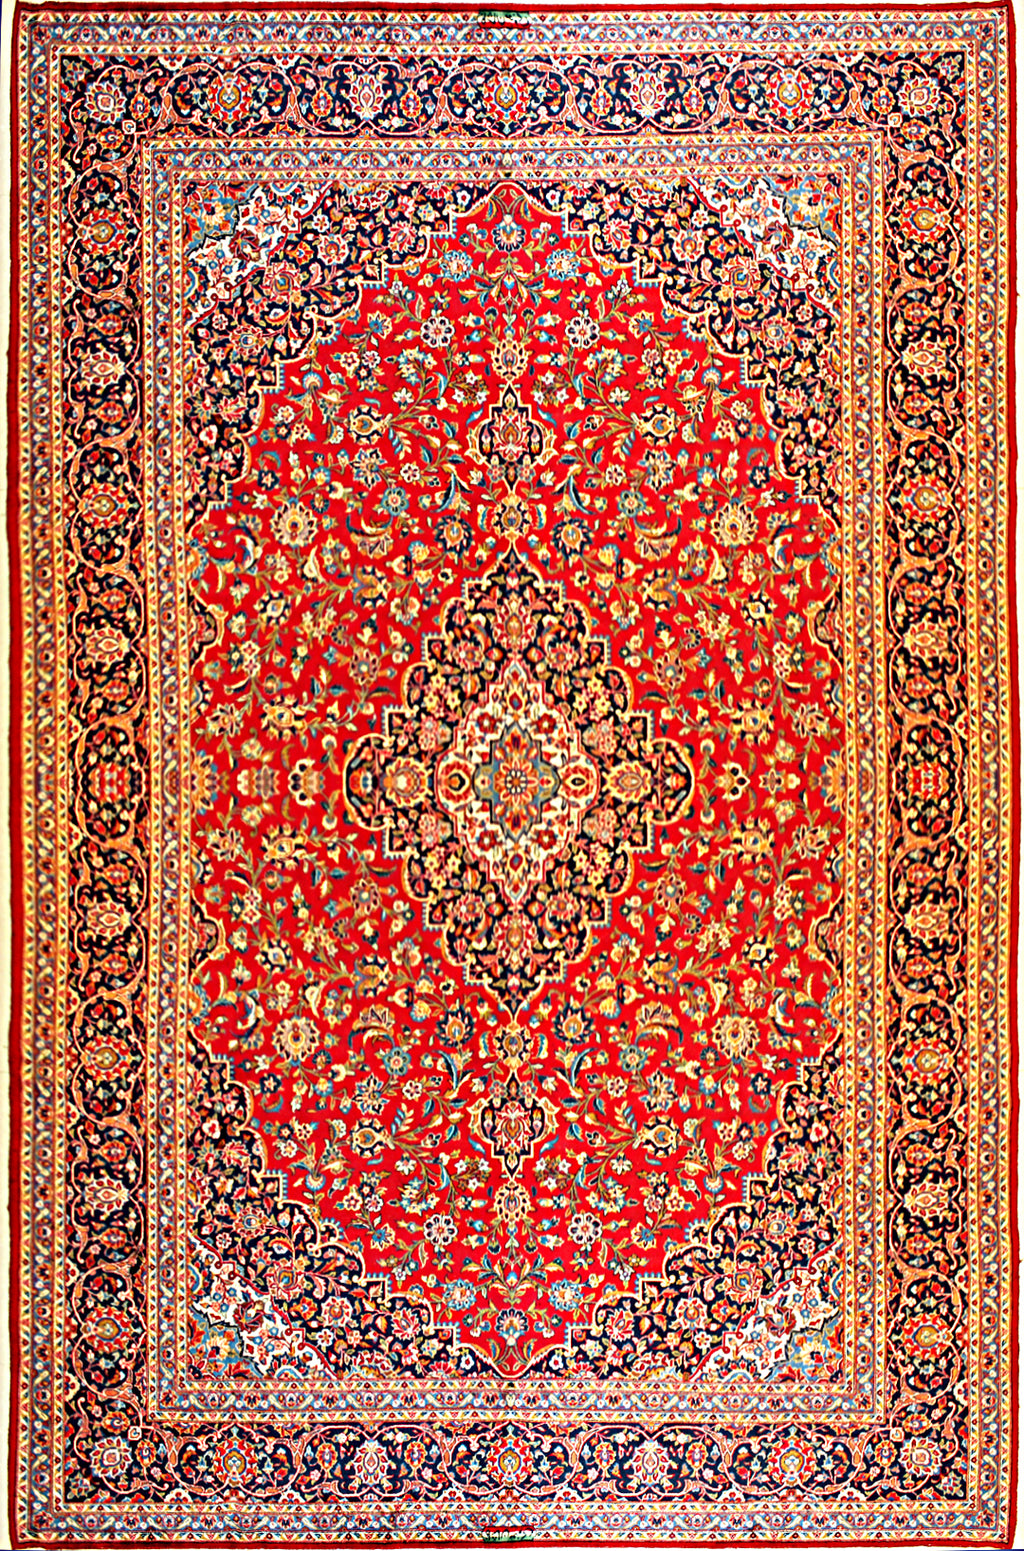 A 10 feet by 14 feet antique persian wool rug with red, beige and blue colours.